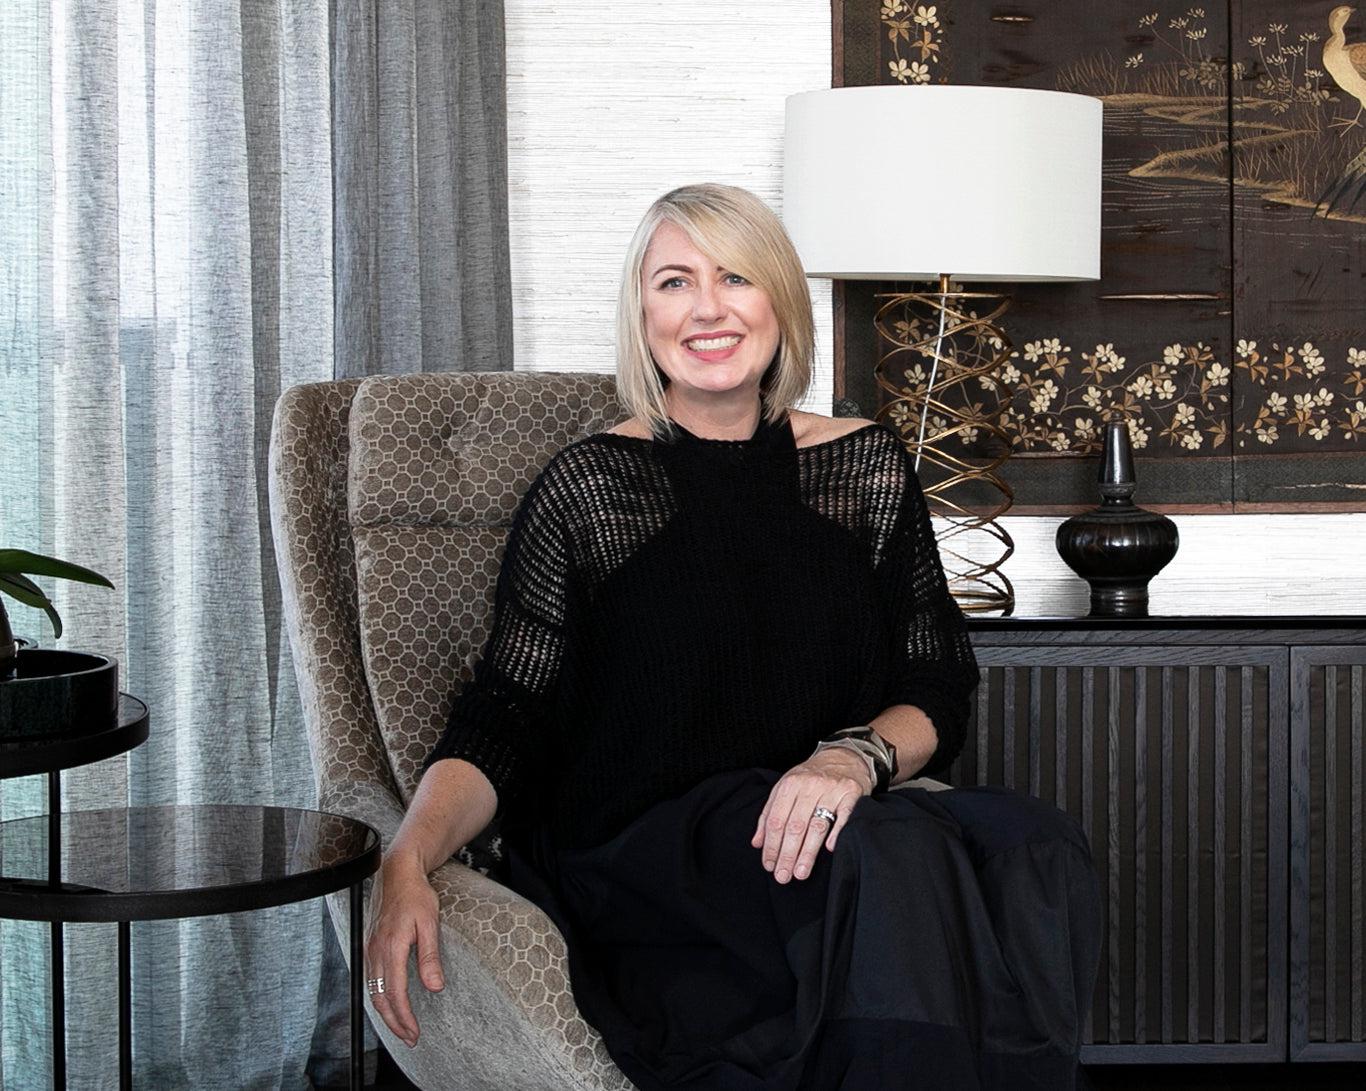 Sitting Down with talented architect and interior designer Brooke Aitken